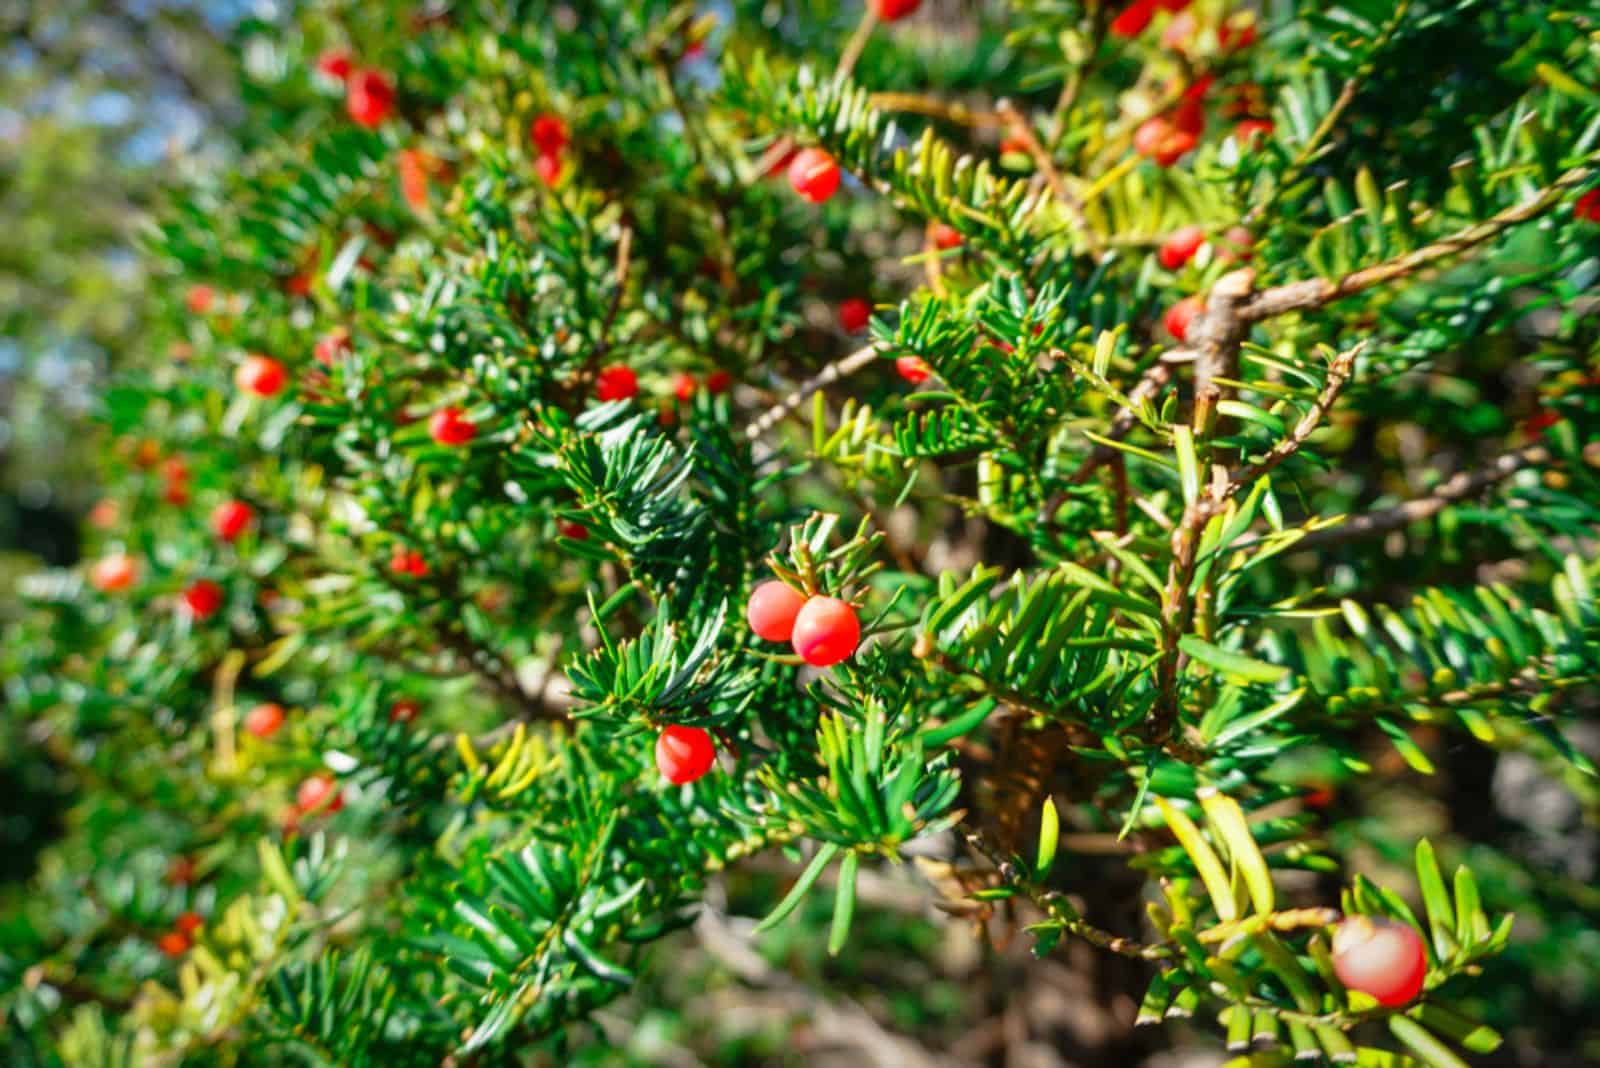 Taxus cuspidata with red berries